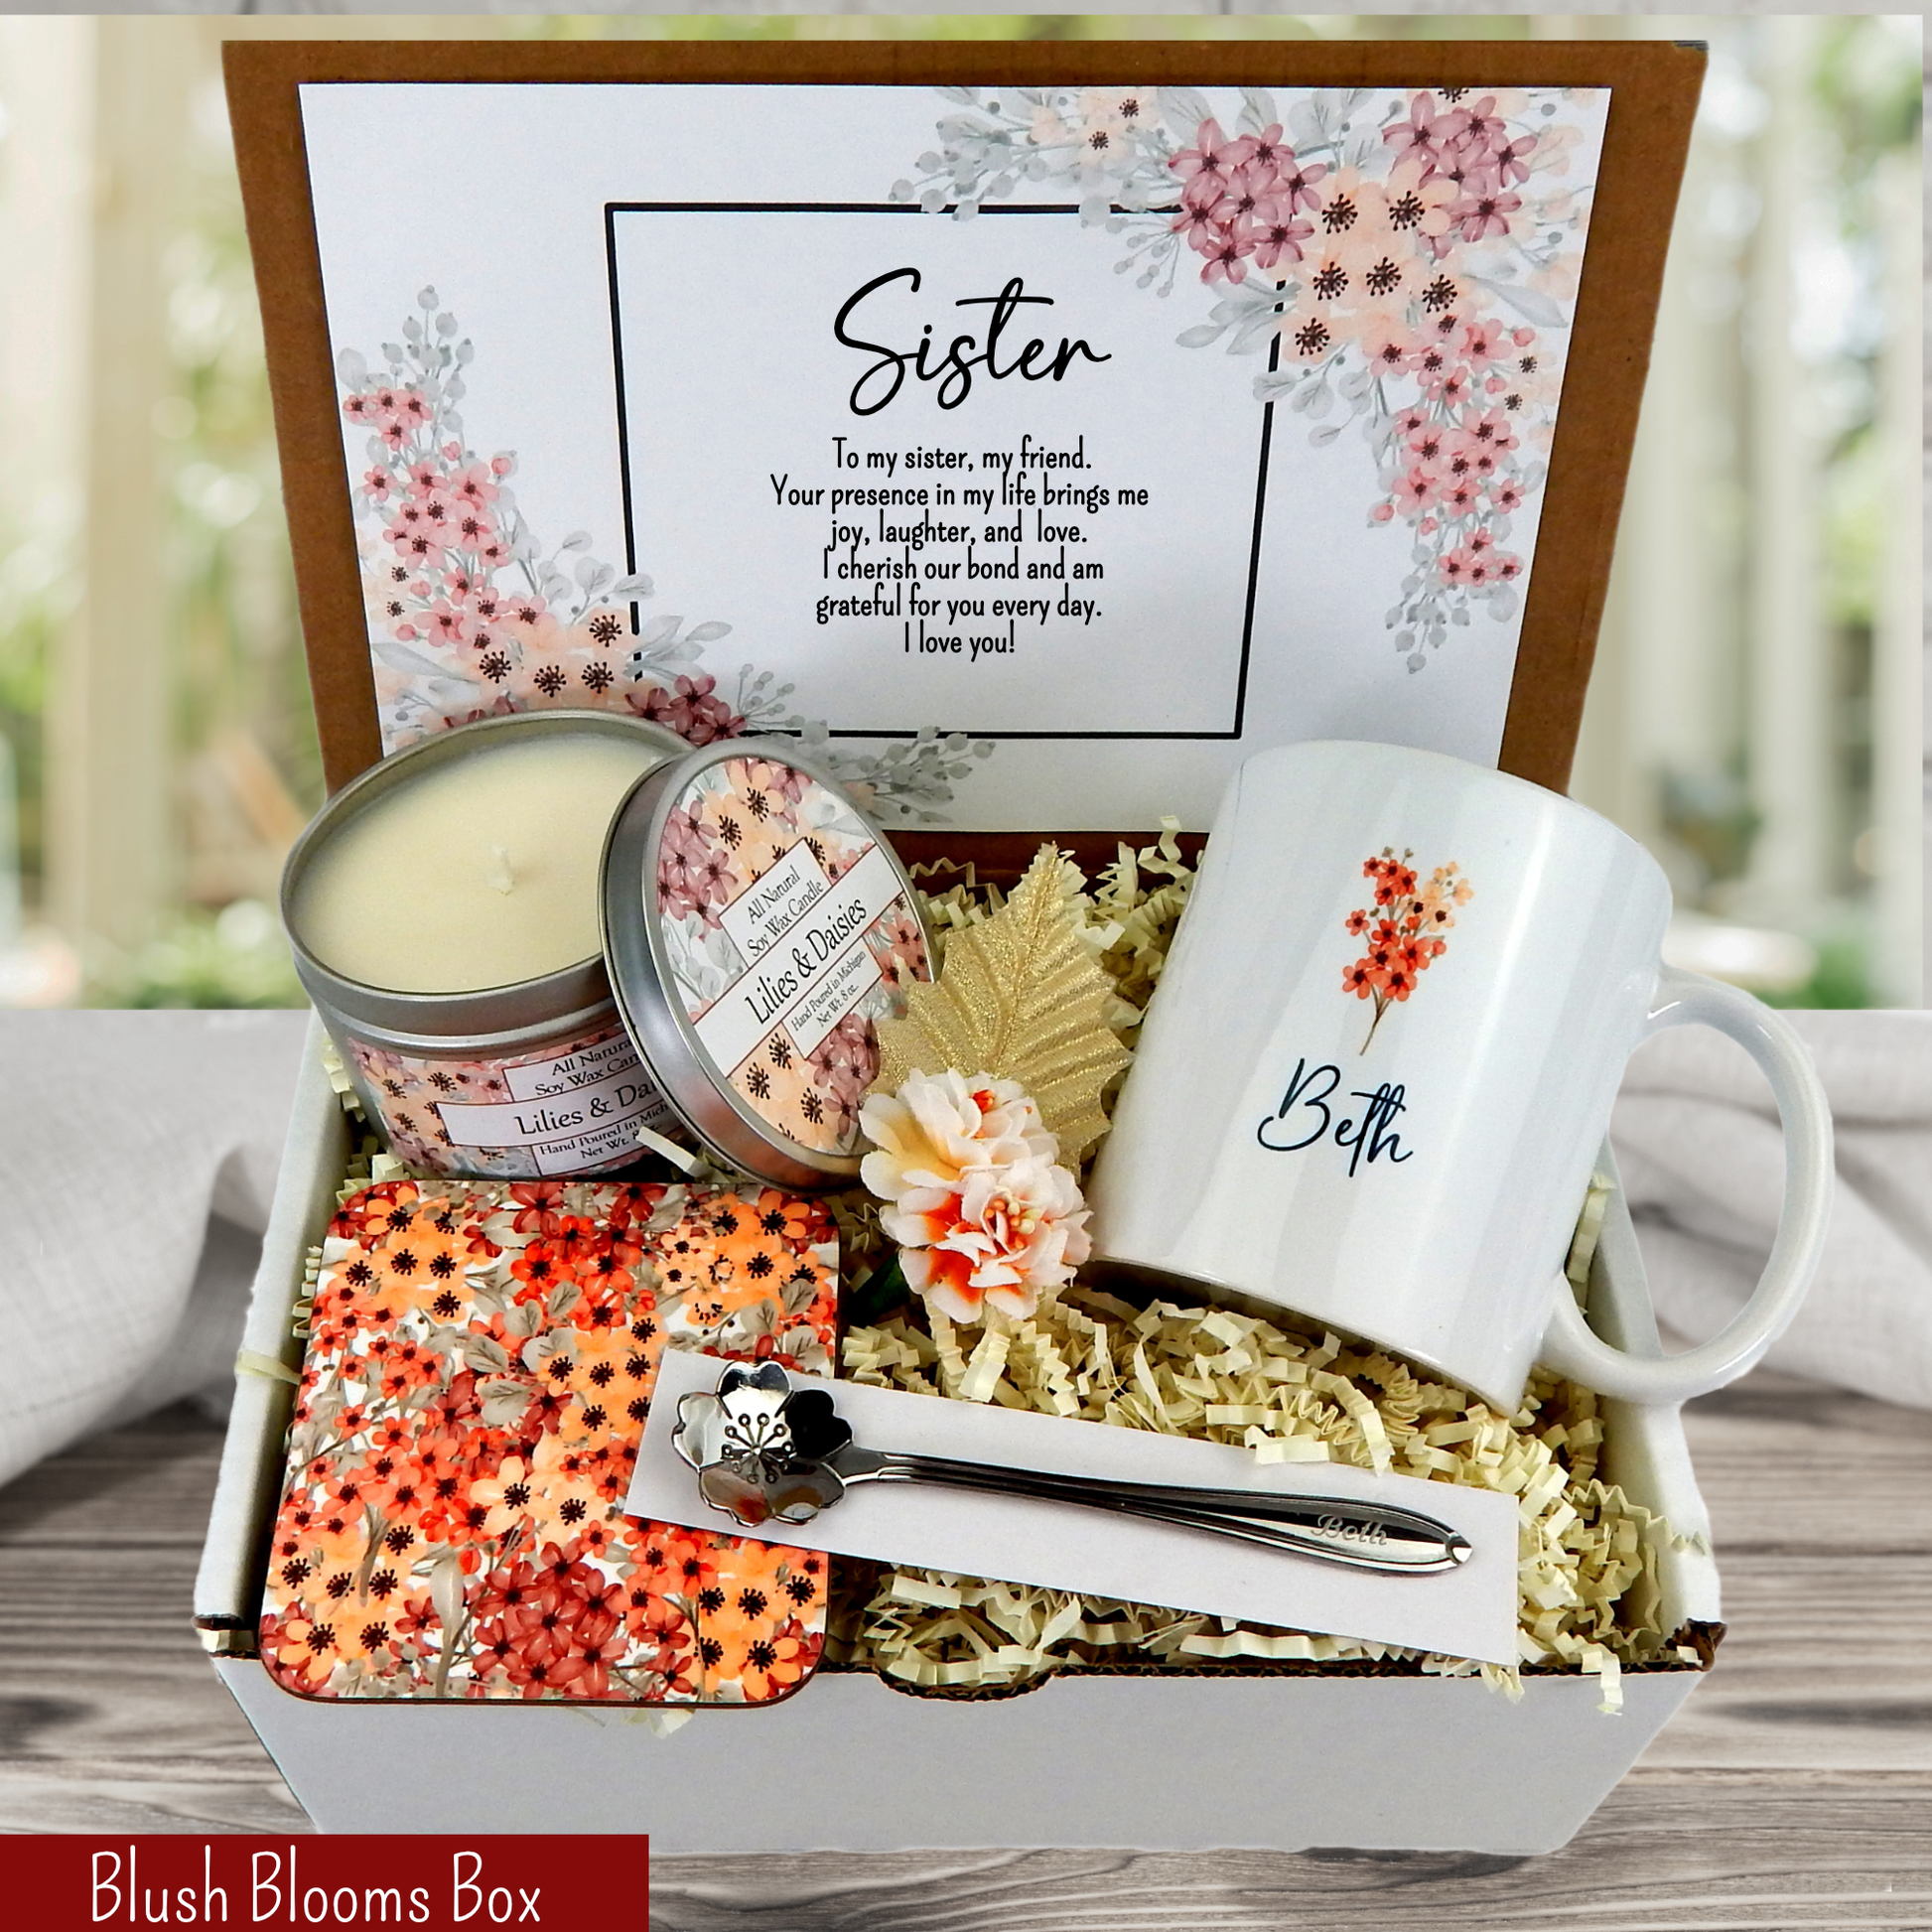 Unique sister's gift basket: custom mug, engraved spoon, coaster, candle, and special message. The pattern is blush colored flowers.